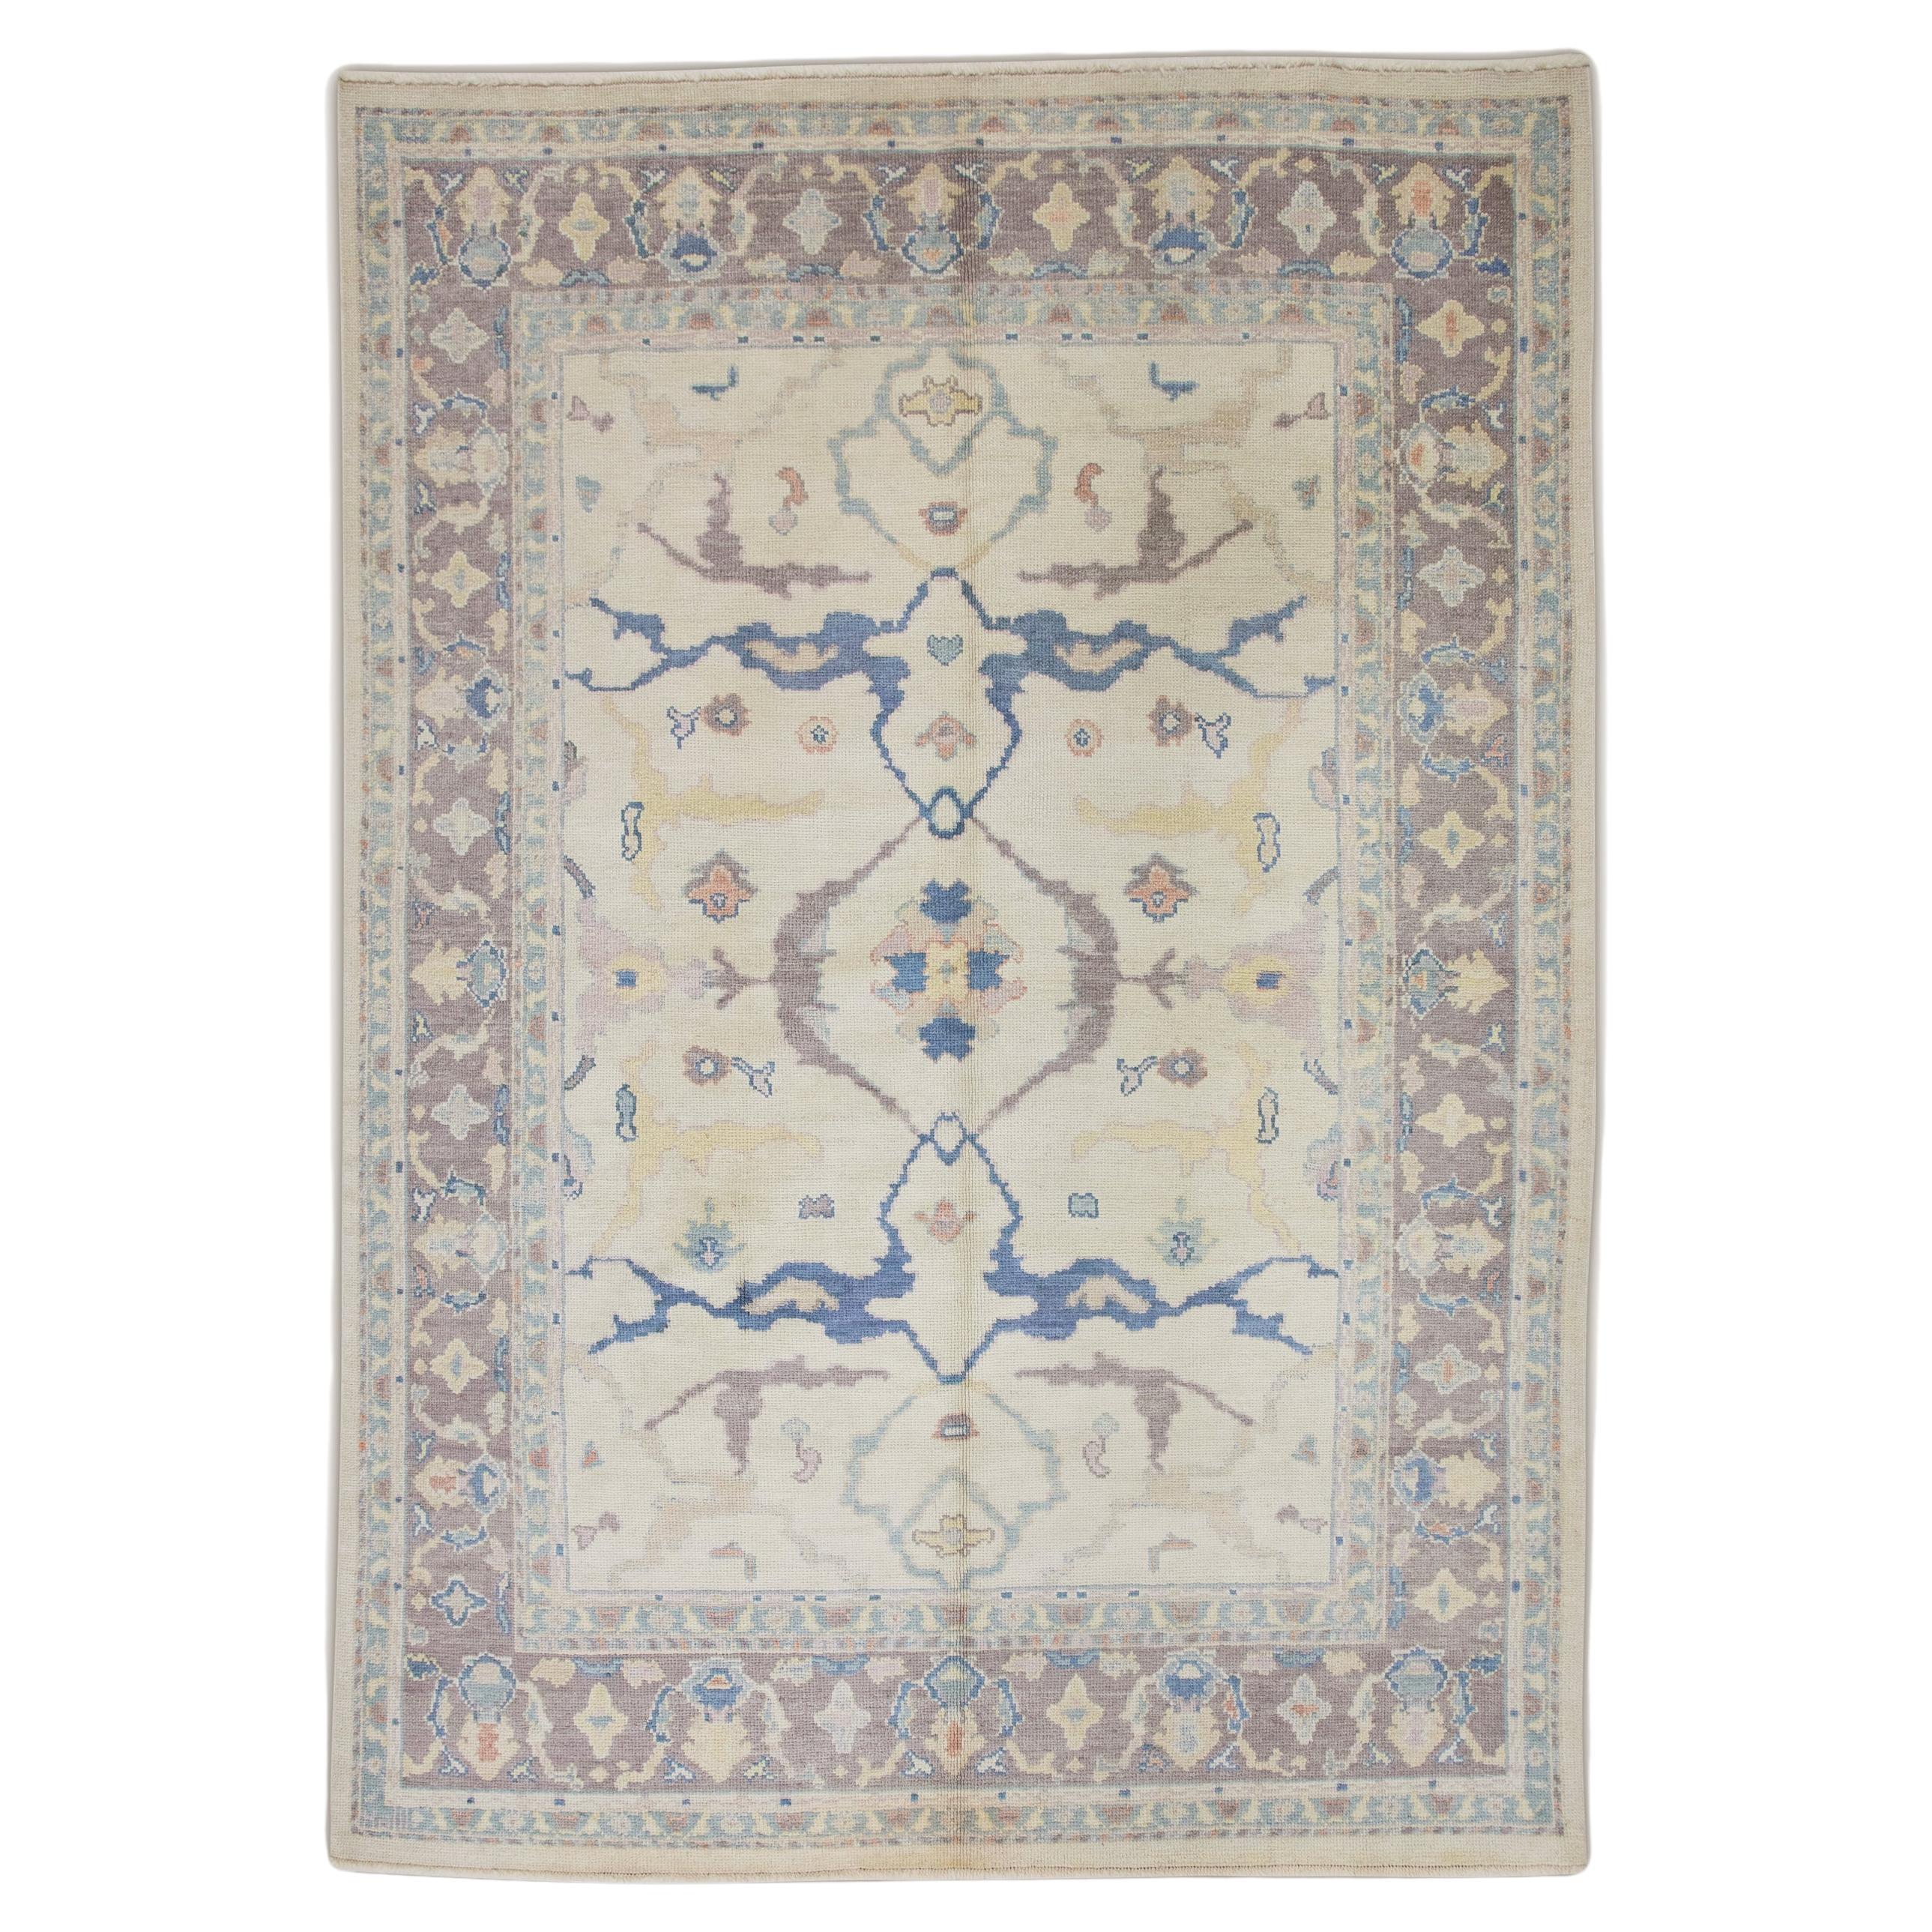 Mauve and Blue Floral Handwoven Wool Turkish Oushak Rug 6'11" x 10'